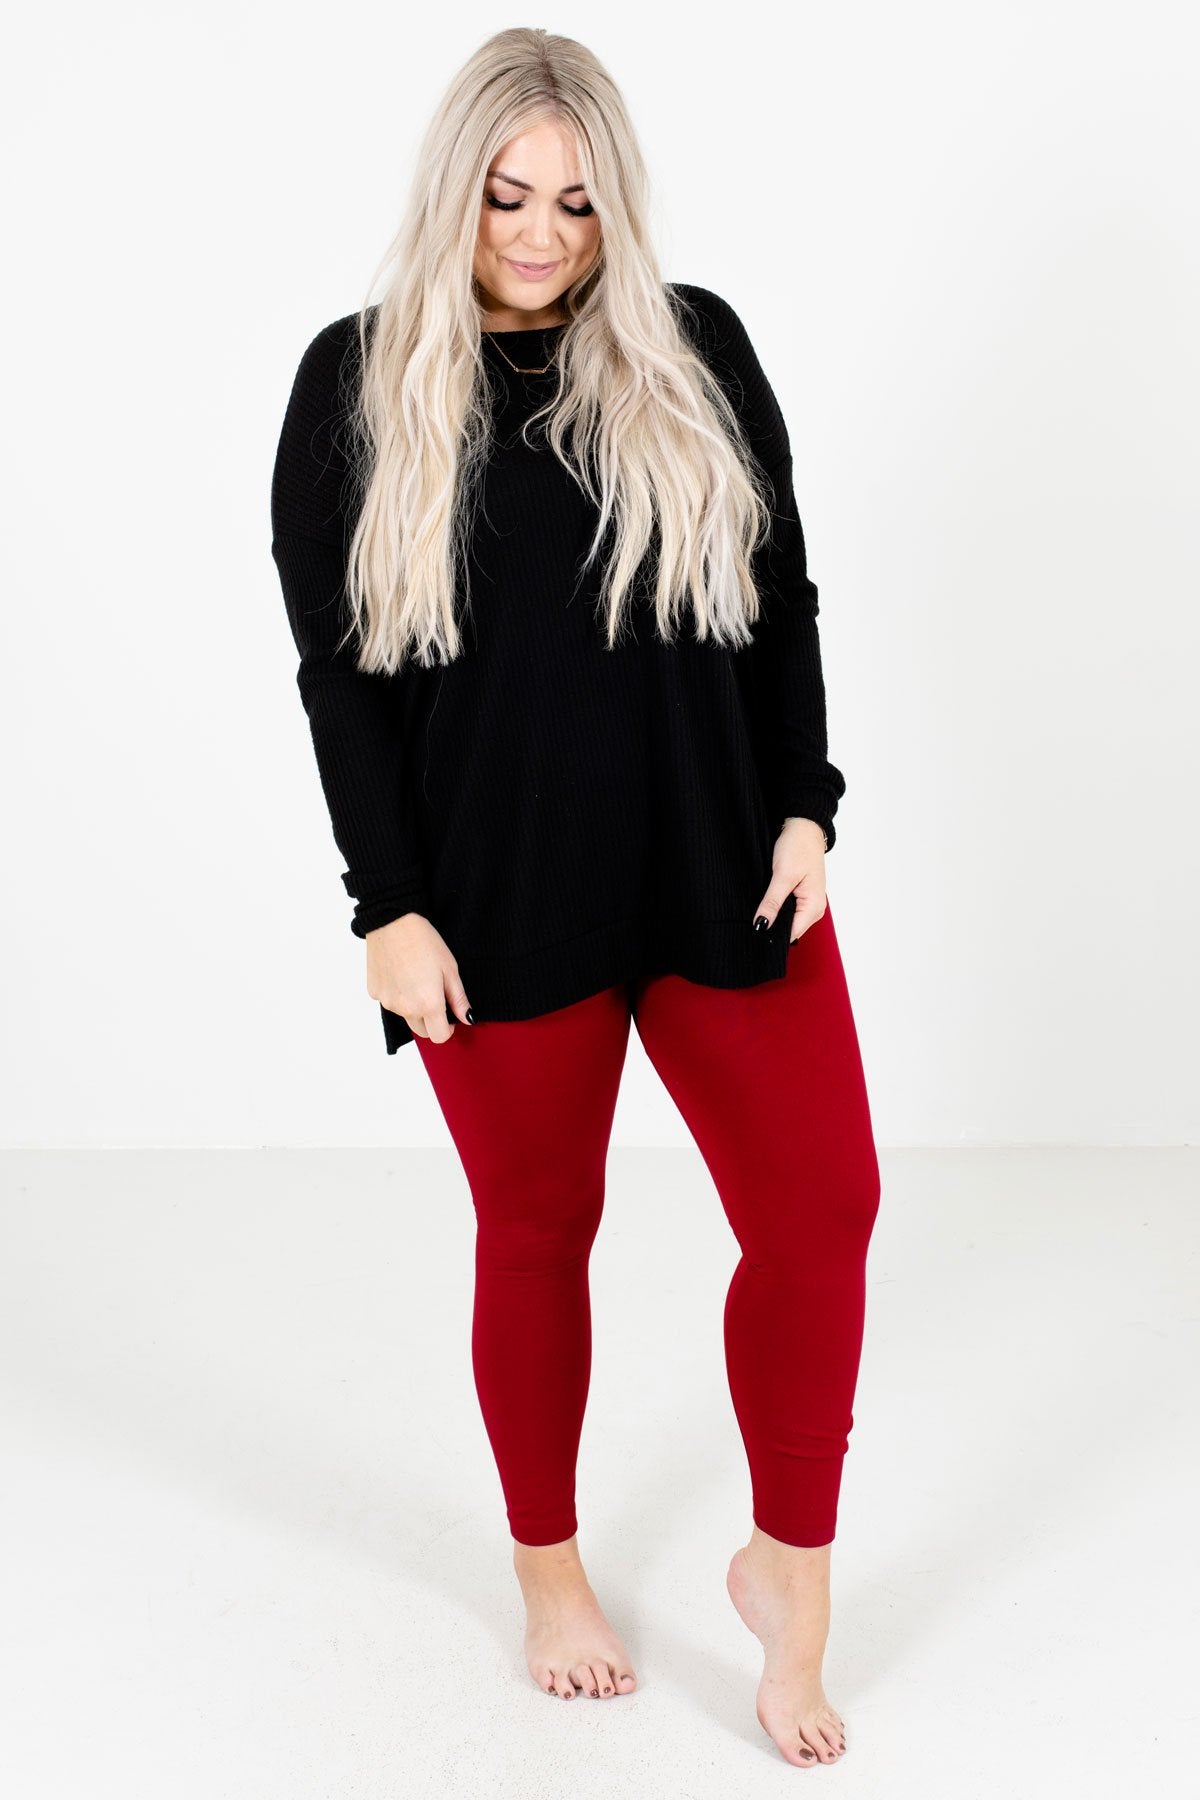 Women's Red Fall and Winter Boutique Clothing